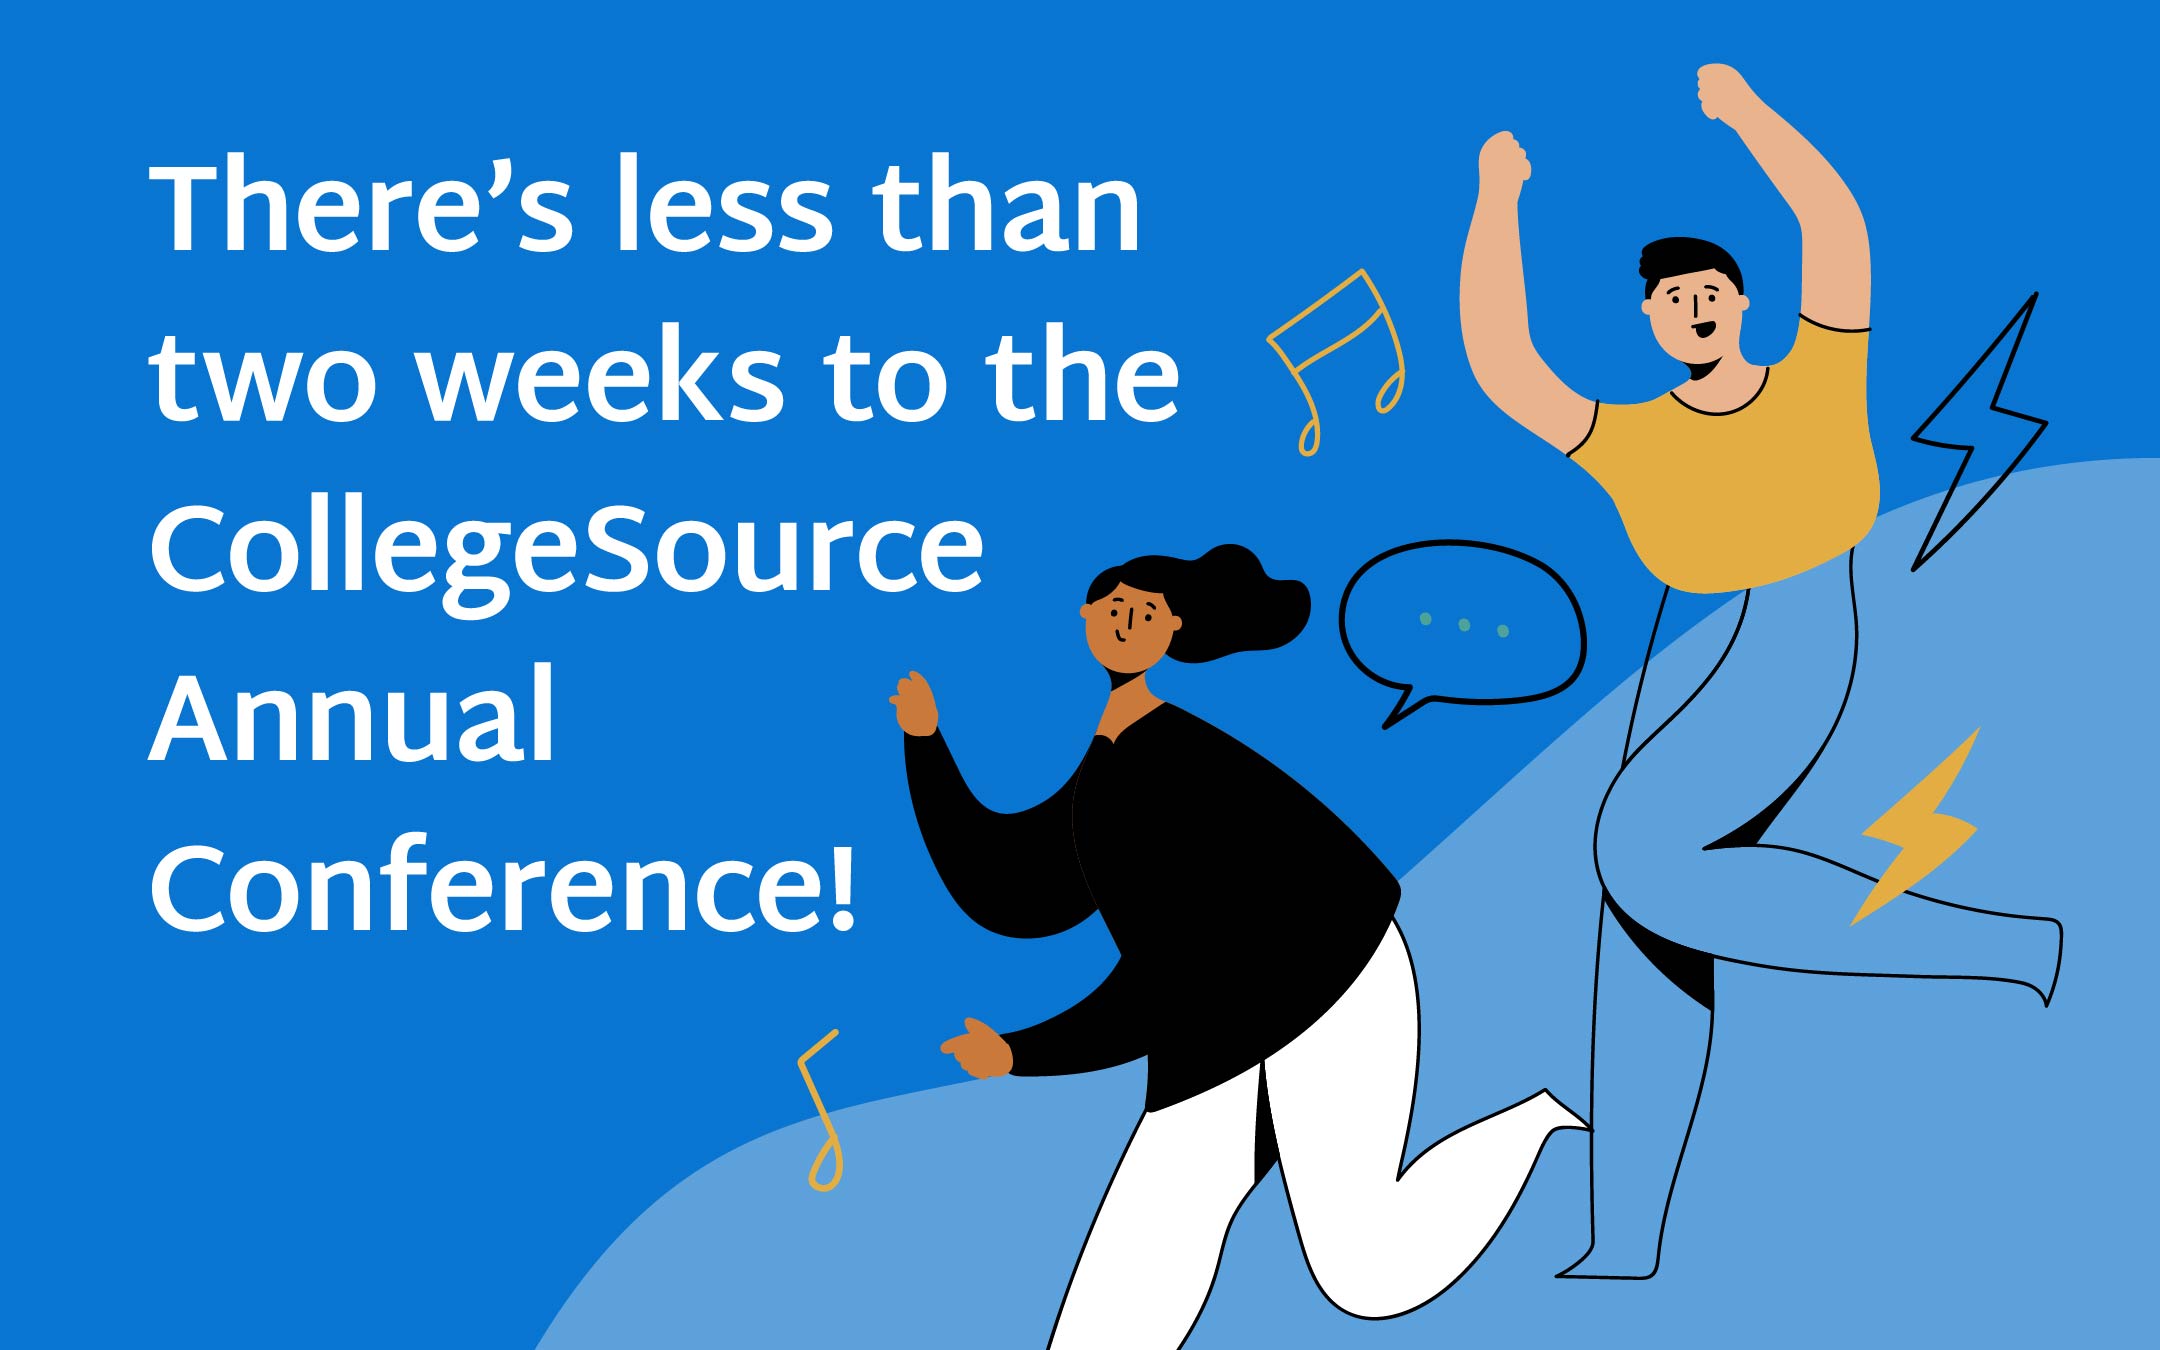 Theres-less-than-2-weeks-to-collegesource-conference